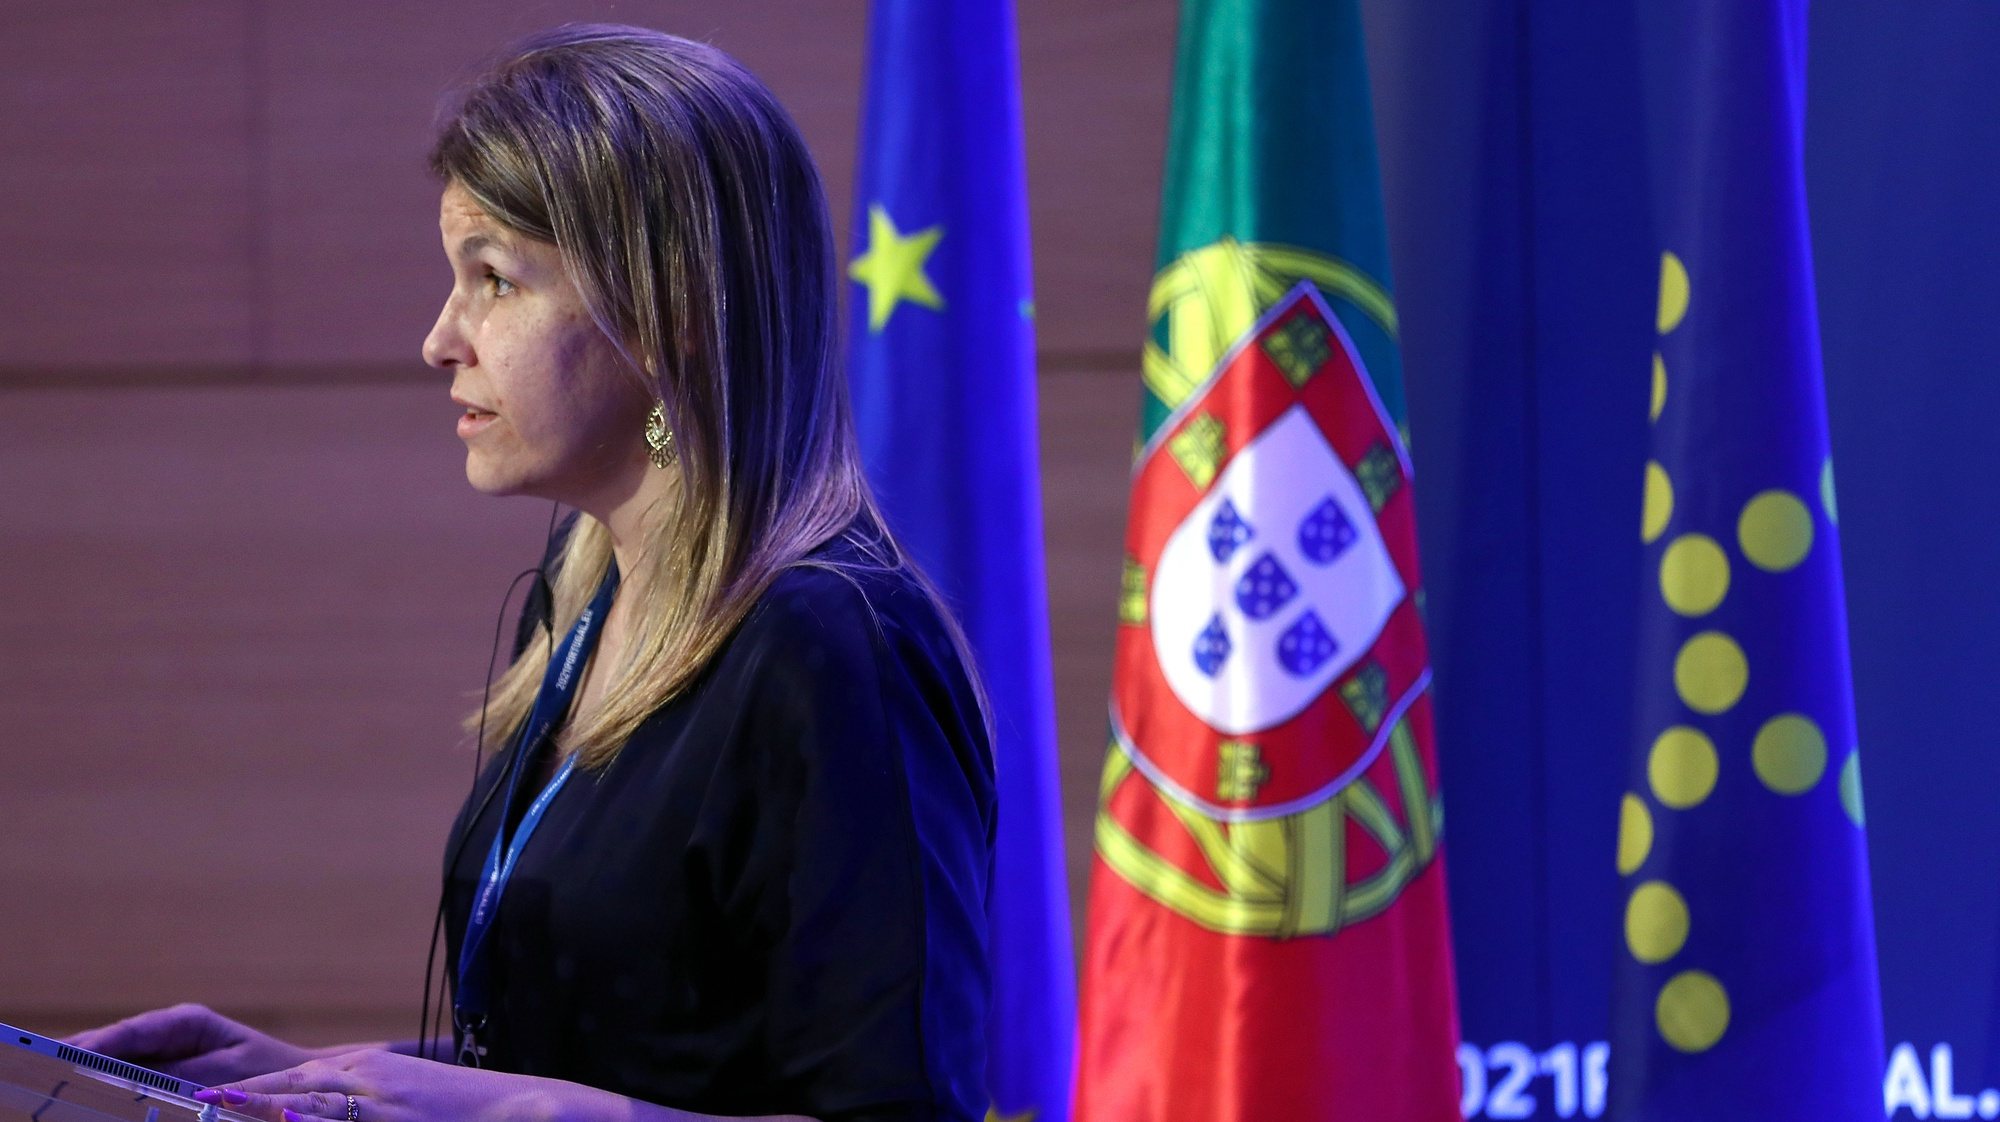 epa09145733 Portuguese Secretary of State for the Inclusion of Persons with Disabilities, Ana Sofia Antunes, attends an high-level video conference on the European Strategy on the Rights of Persons with Disabilities 2021-2030 under the Portuguese Presidency of the European Council, in Lisbon, Portugal, 19 April 2021. Based on the new strategy on the rights of persons with disabilities, the discussion will pay particular attention to essential areas that affect the daily lives of people with disabilities, such as accessibility, independent life, deinstitutionalisation, community-based and person-centred social services, employment and inclusive education.  EPA/ANTONIO PEDRO SANTOS